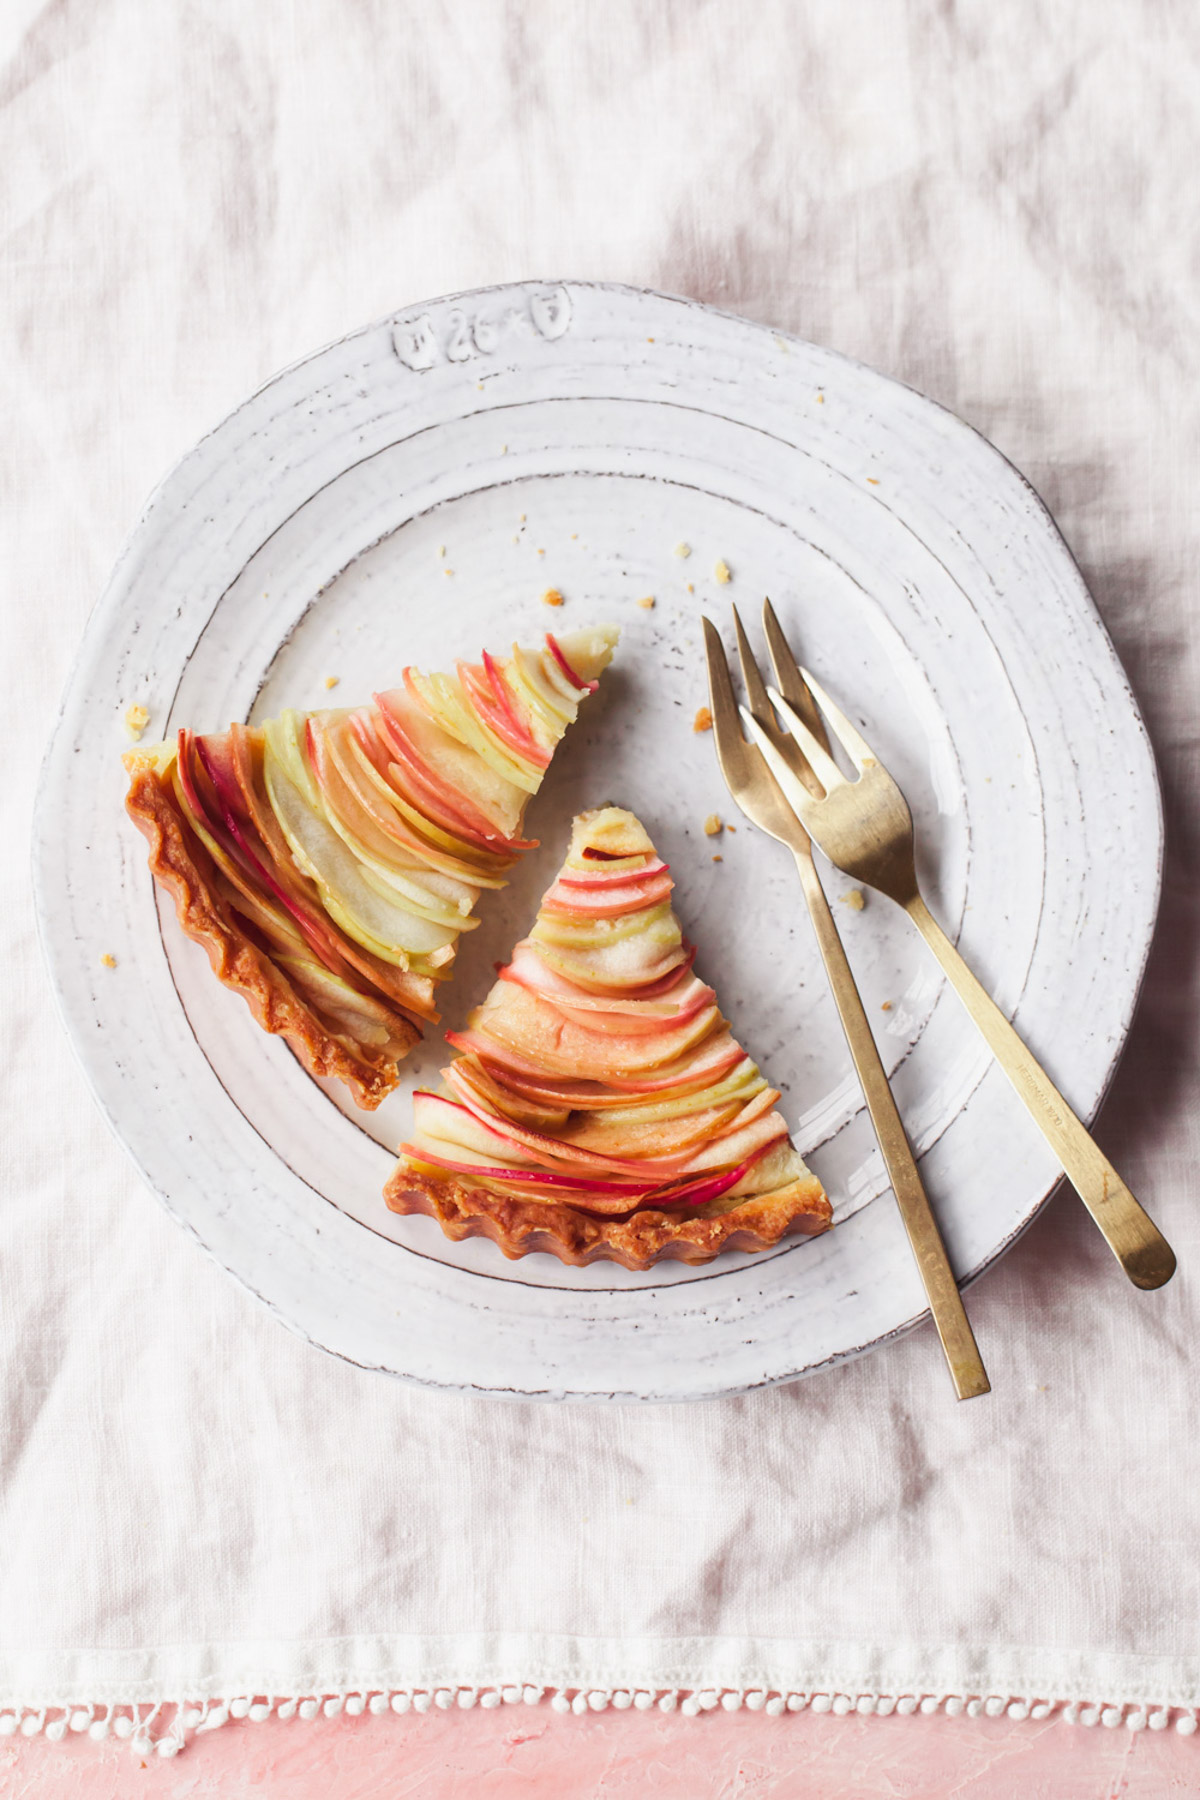 Two sliced of apple tart on a plate